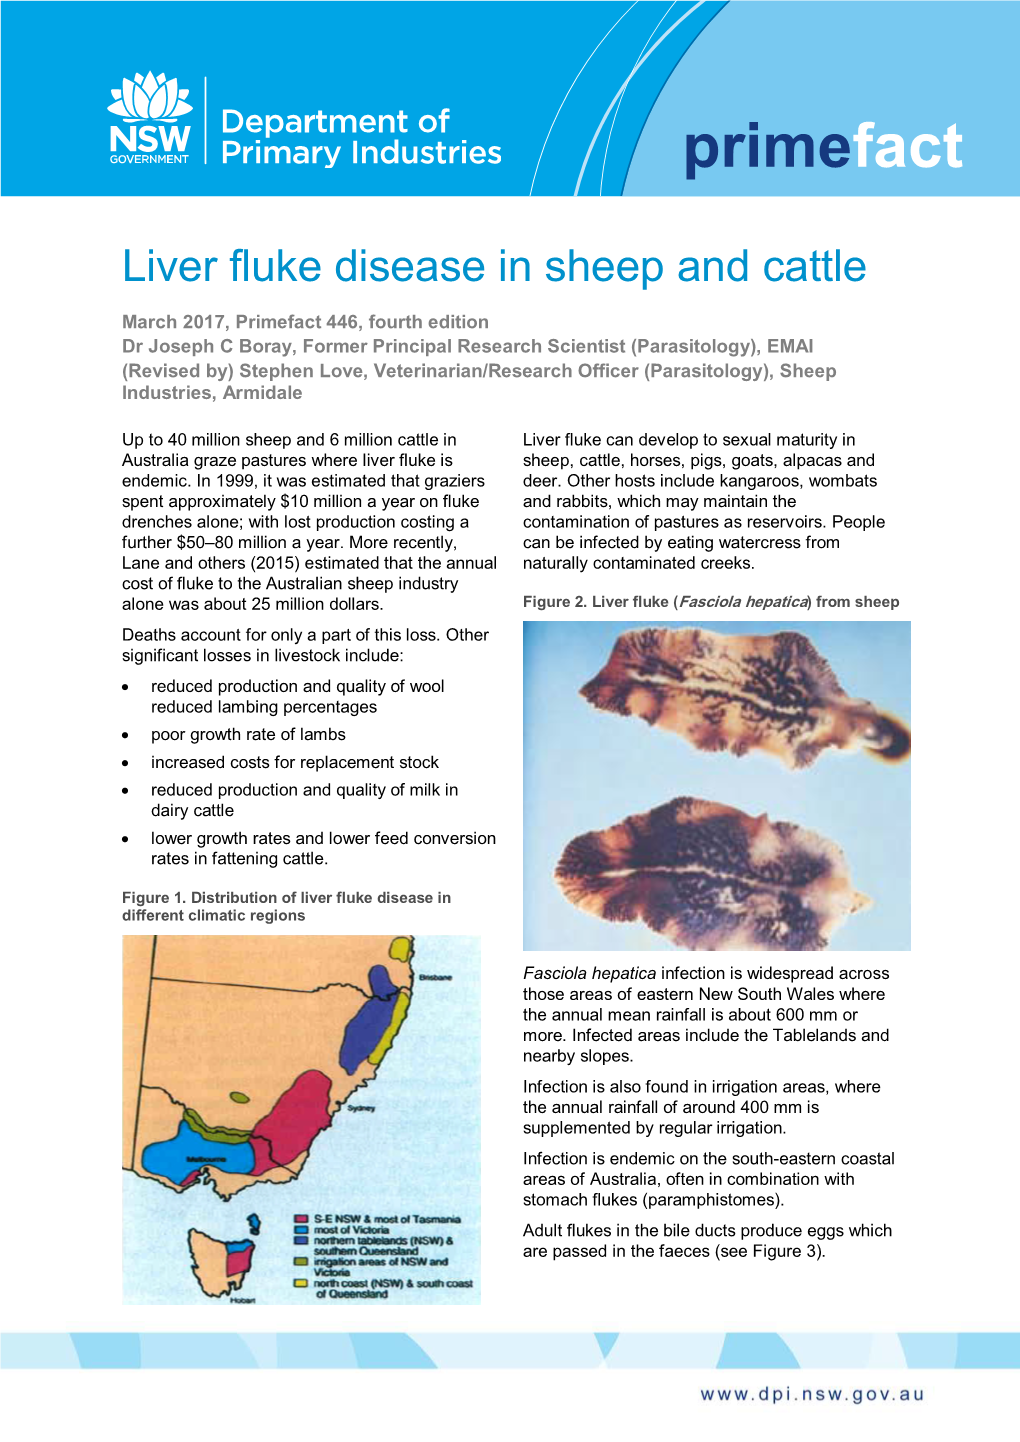 Liver Fluke Disease in Sheep and Cattle